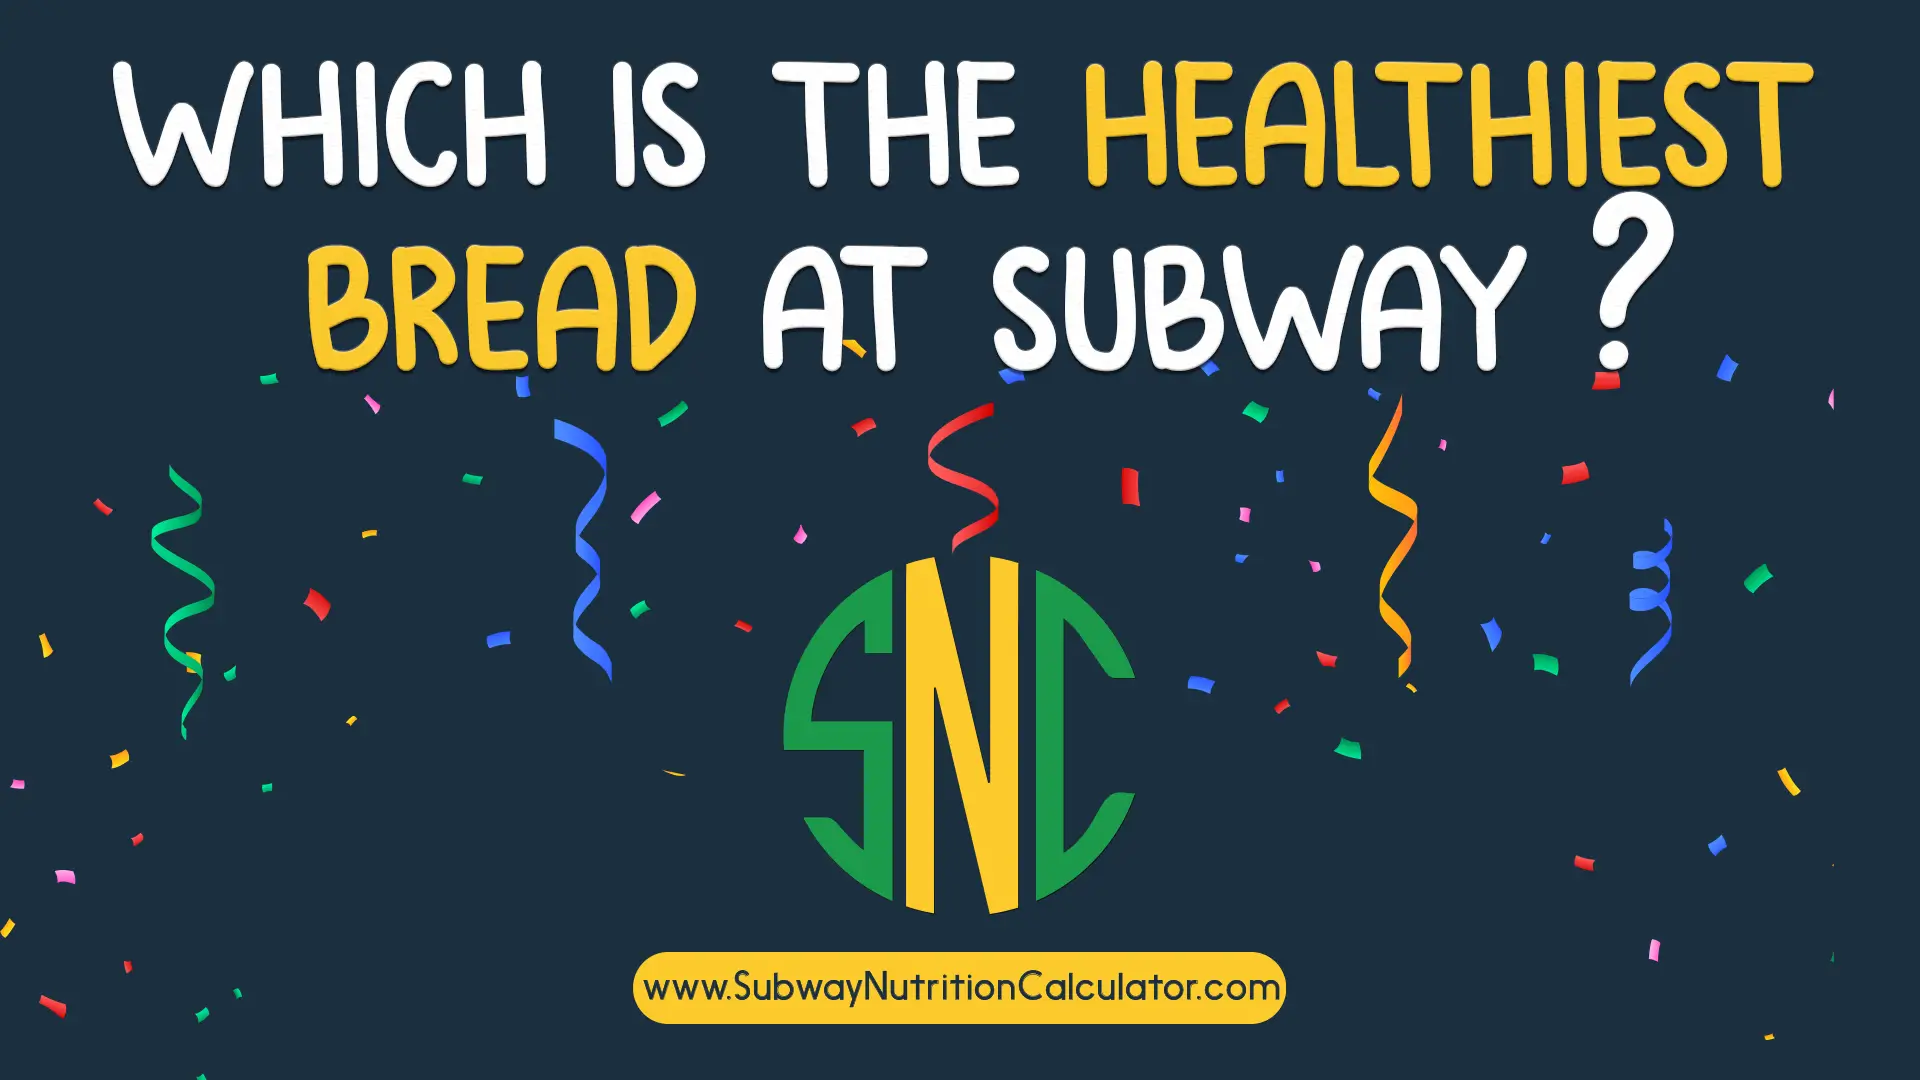 which is the healthiest bread at subway ?
              